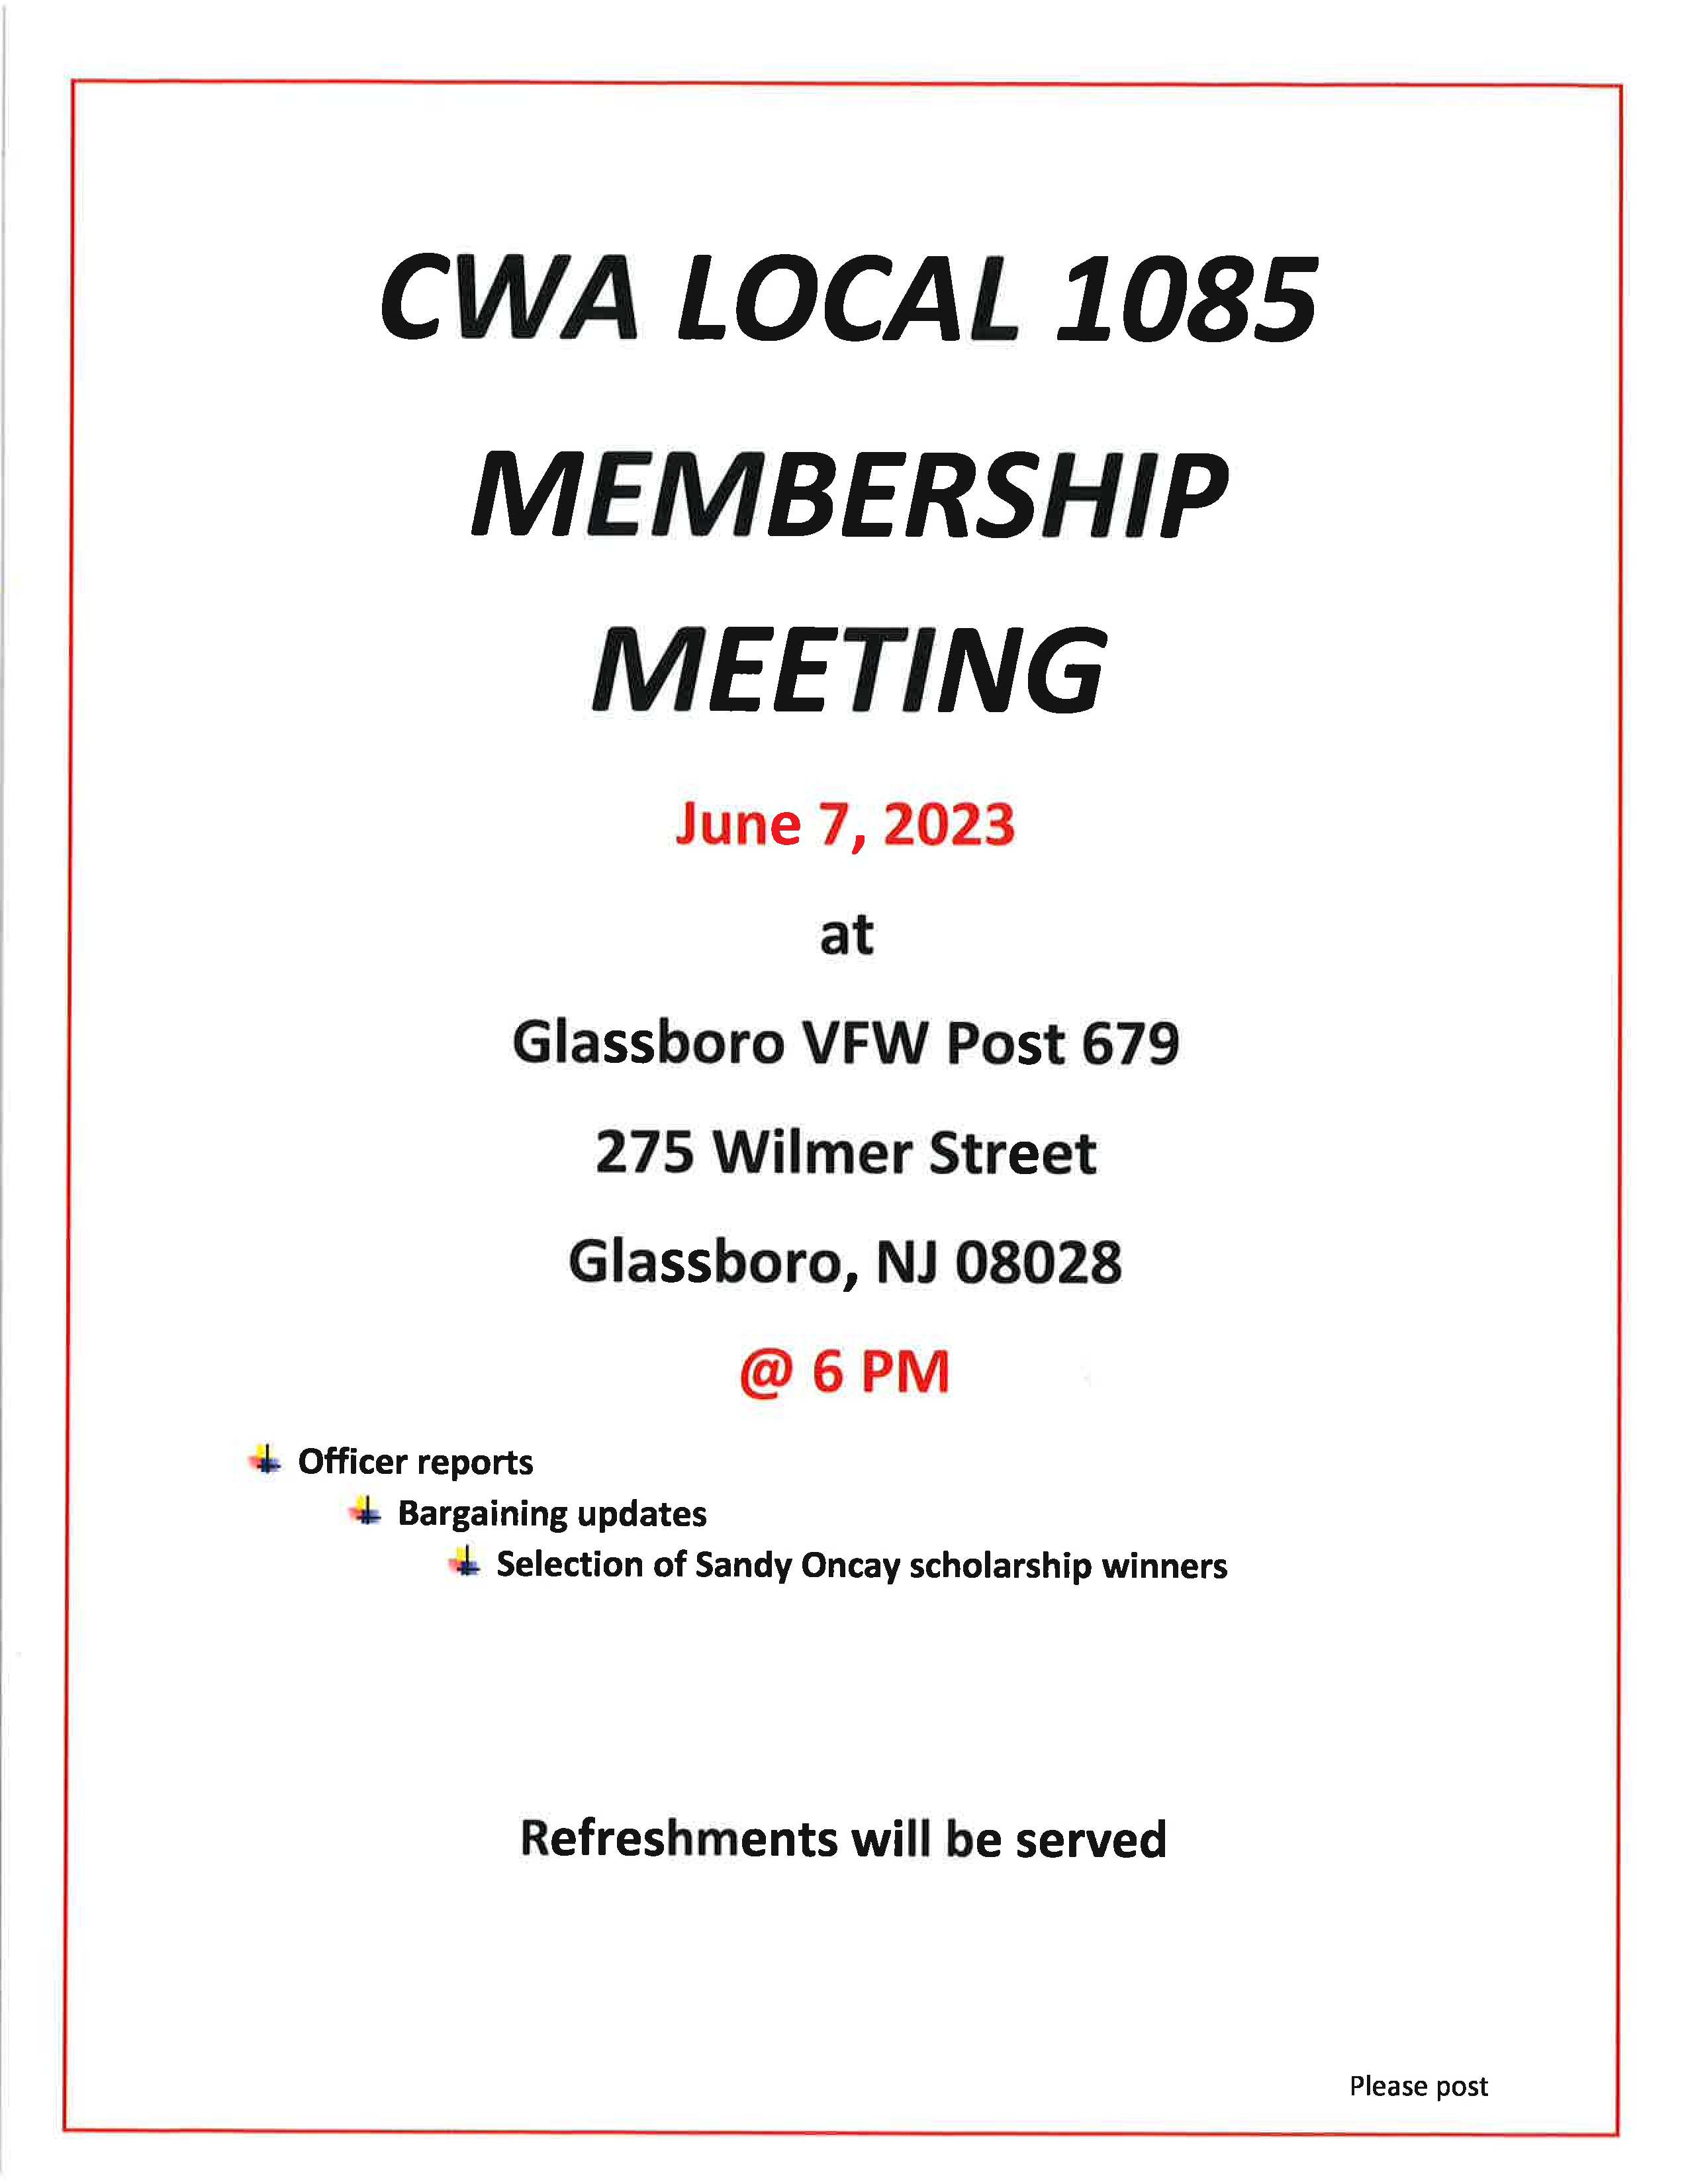 CWA Local 1085 June Meeting Flyer